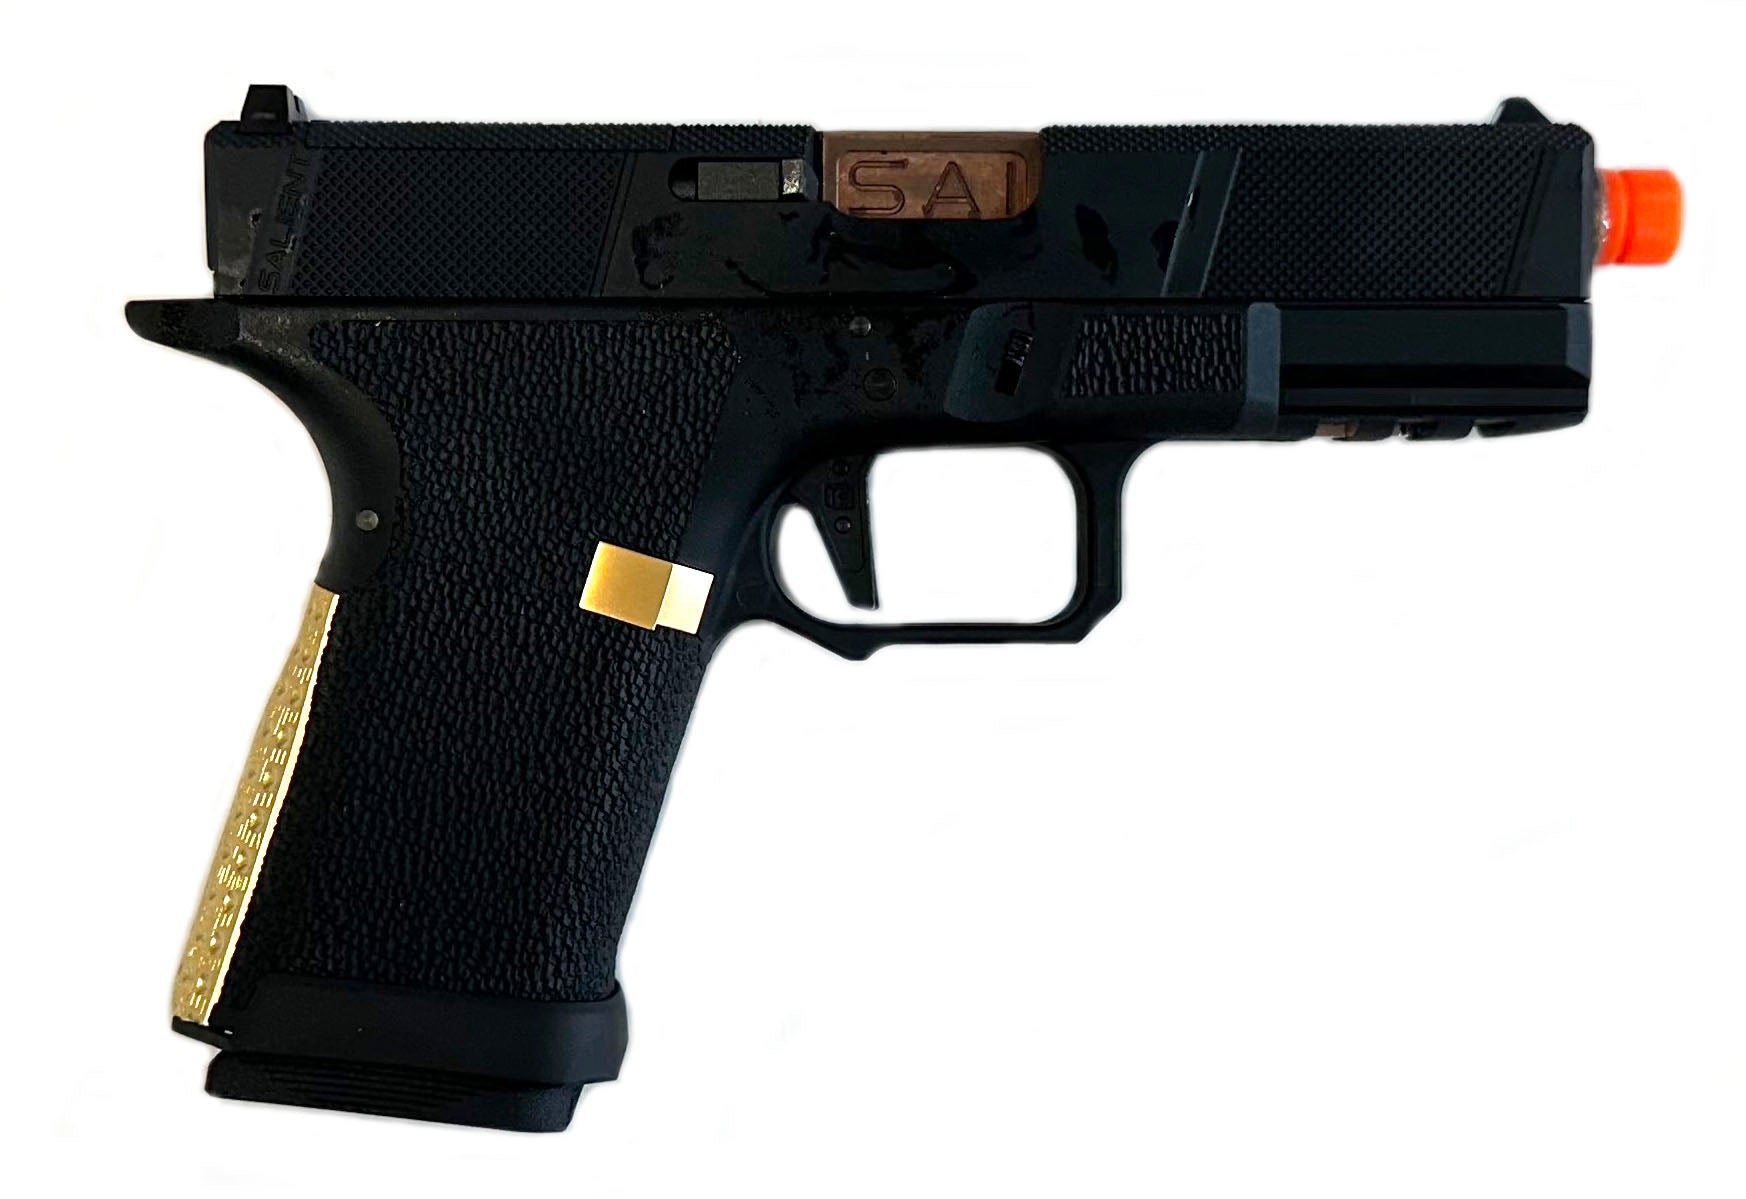 EMG Compact Tier One Utility RMR-Cut Slide GBB Airsoft Pistol - Black Rose Gold